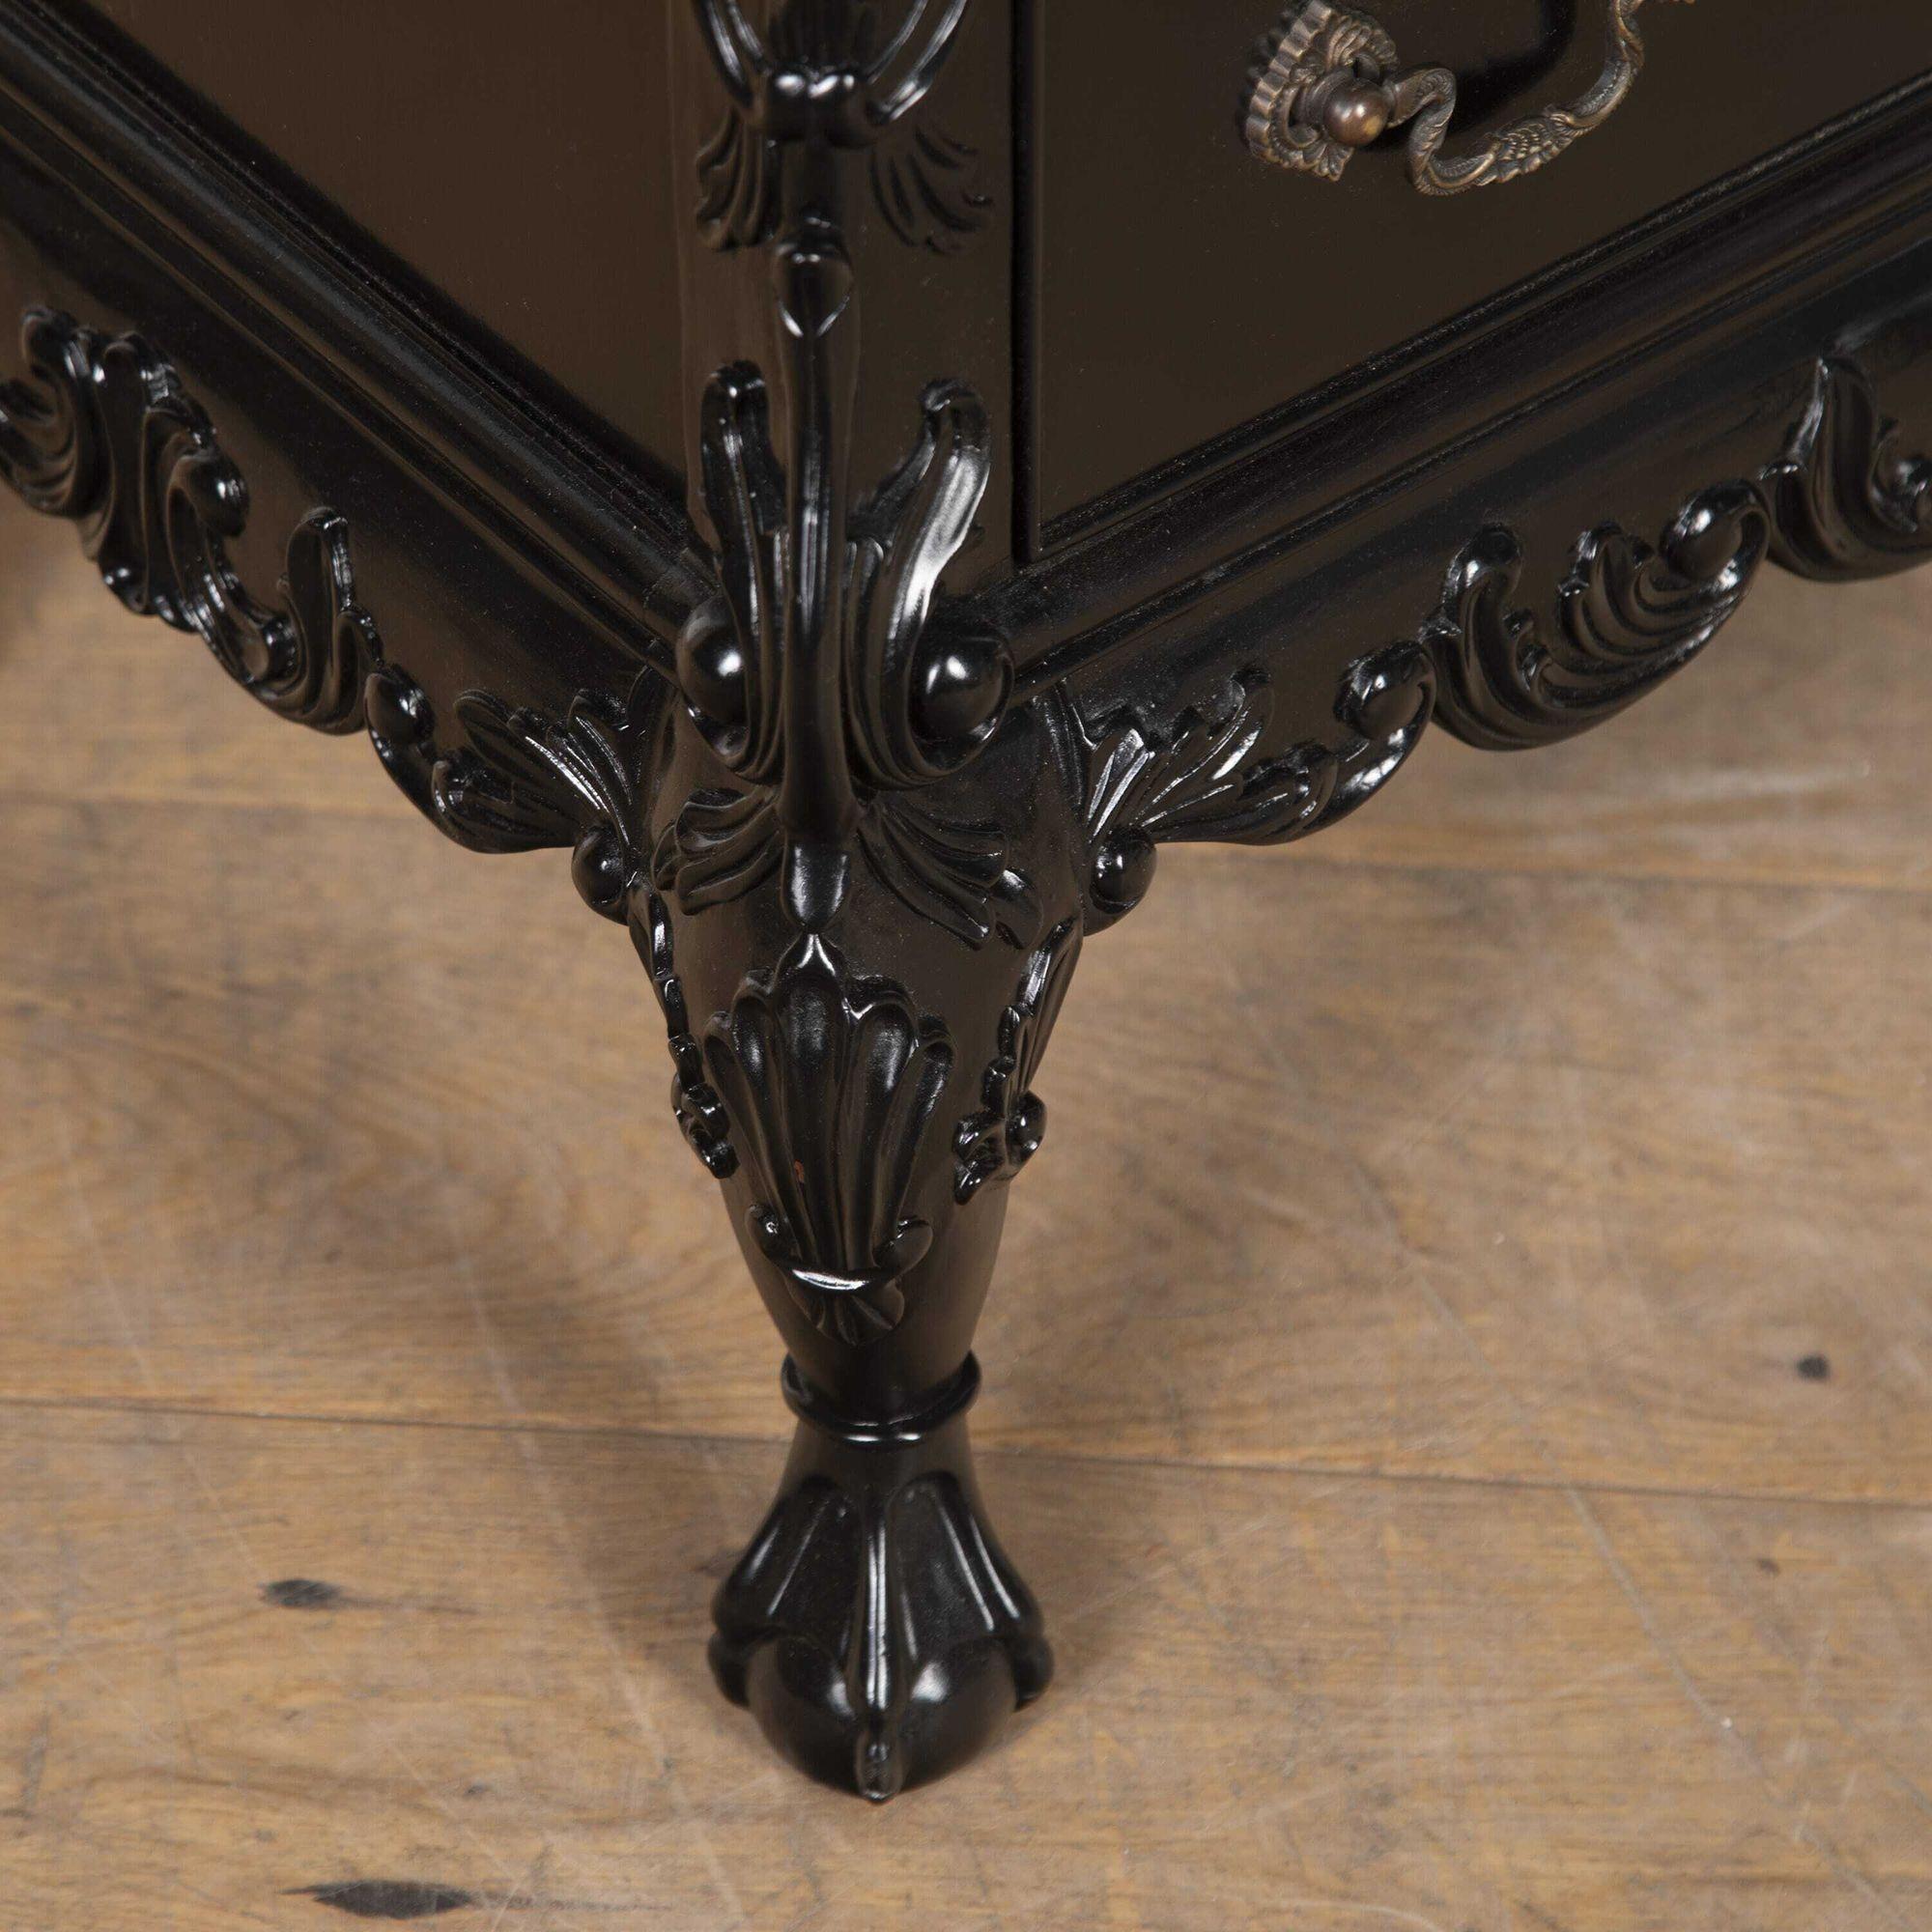 Pair of Mid 20th Century black lacquer commodes in the rococo revival manner.
Both are fitted with three drawers and brass hardware with foliate carving and ball and claw feet. In exceptional condition, ideal for placing either end of a sofa or